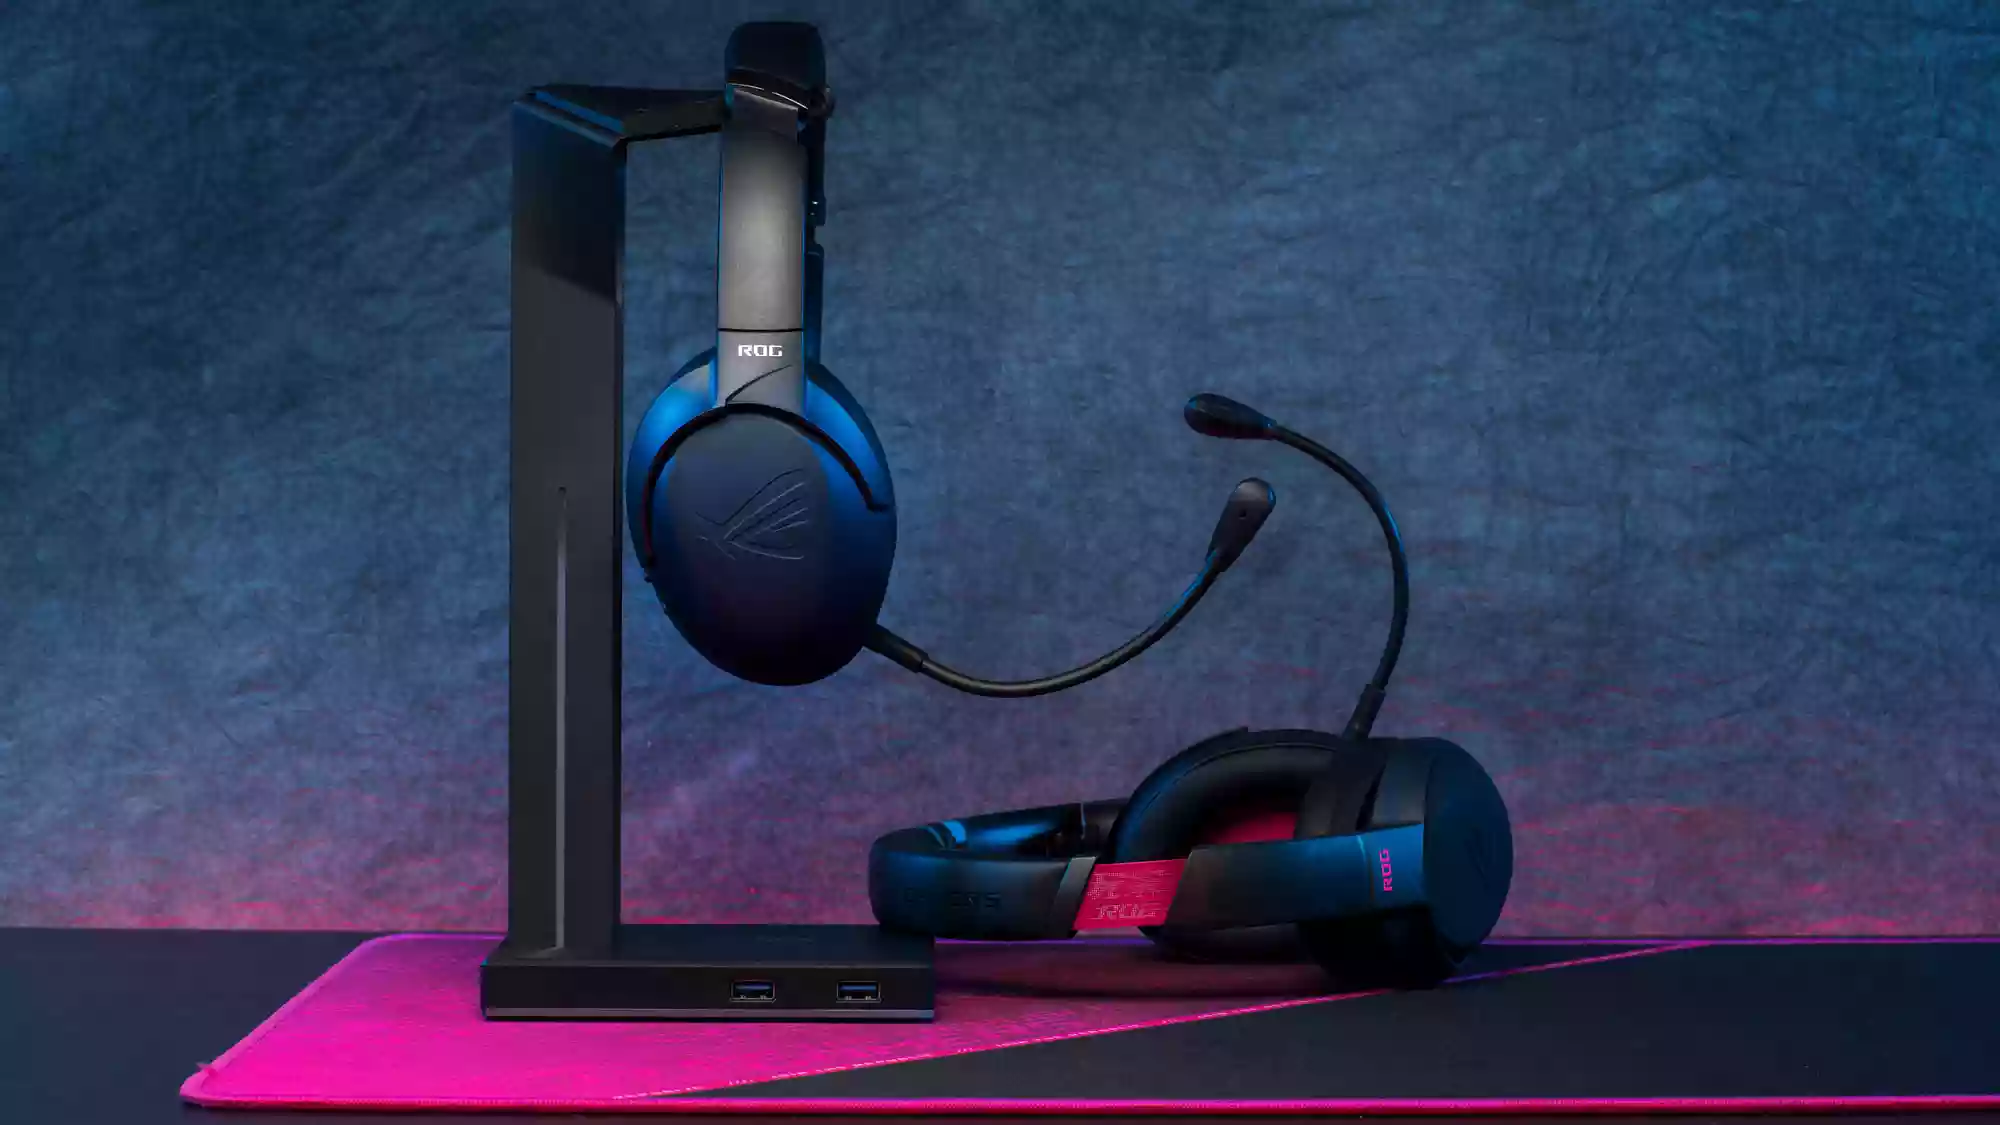 Two ROG Strix Go headsets, one resting on a desk and the other hanging on a stand.